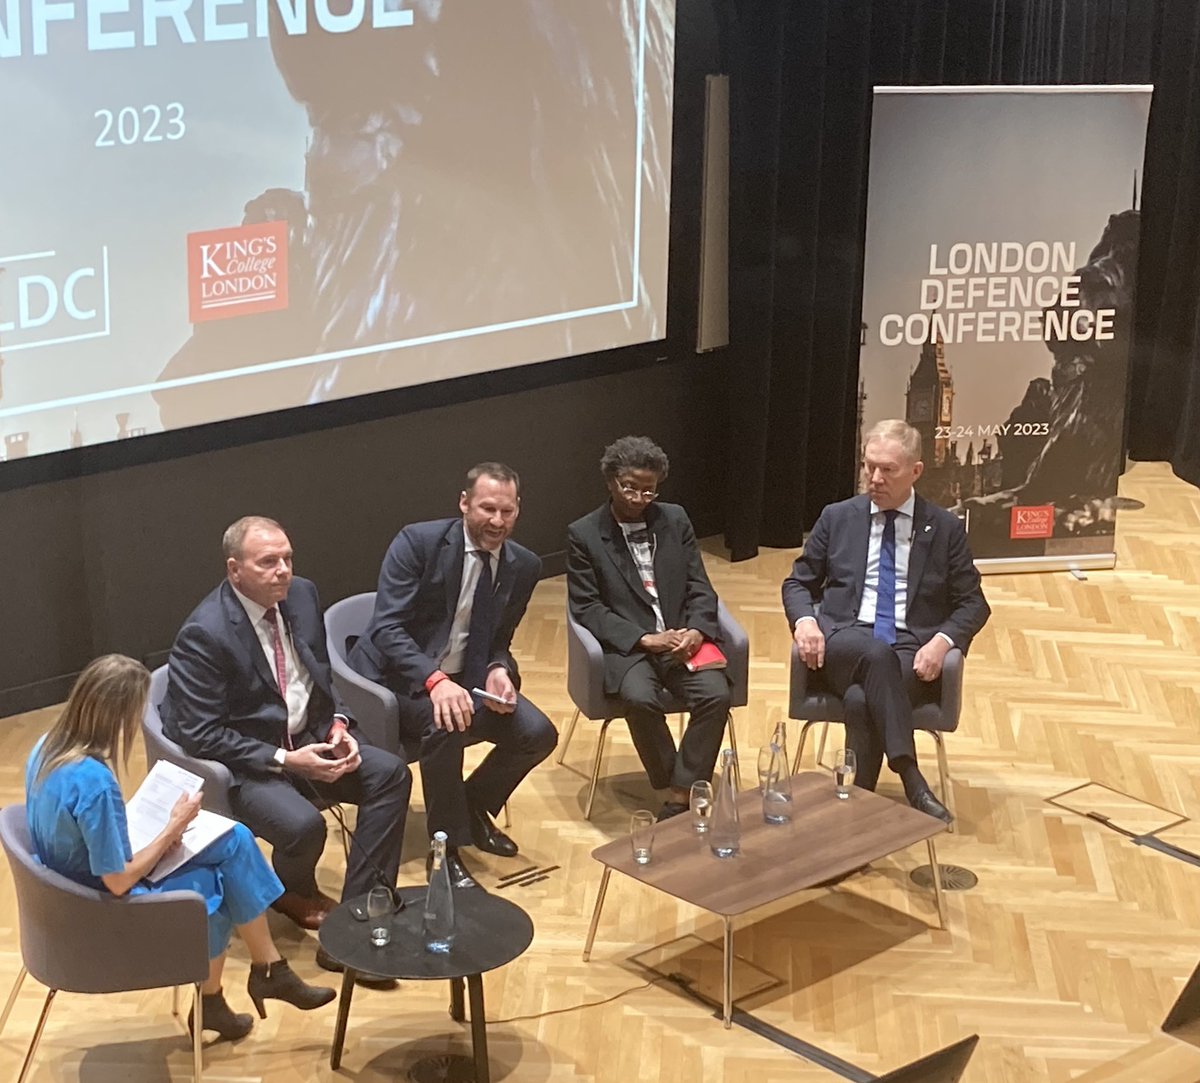 “19 out of 20 years in Afghanistan, we never had a clear objective” - @general_ben on command and leadership in the final panel from Day 2 at the London Defence Conference #LDC2023 with @haynesdeborah @LukeDCoffey @FunmiOlonisakin & @markomihkelson👇👇